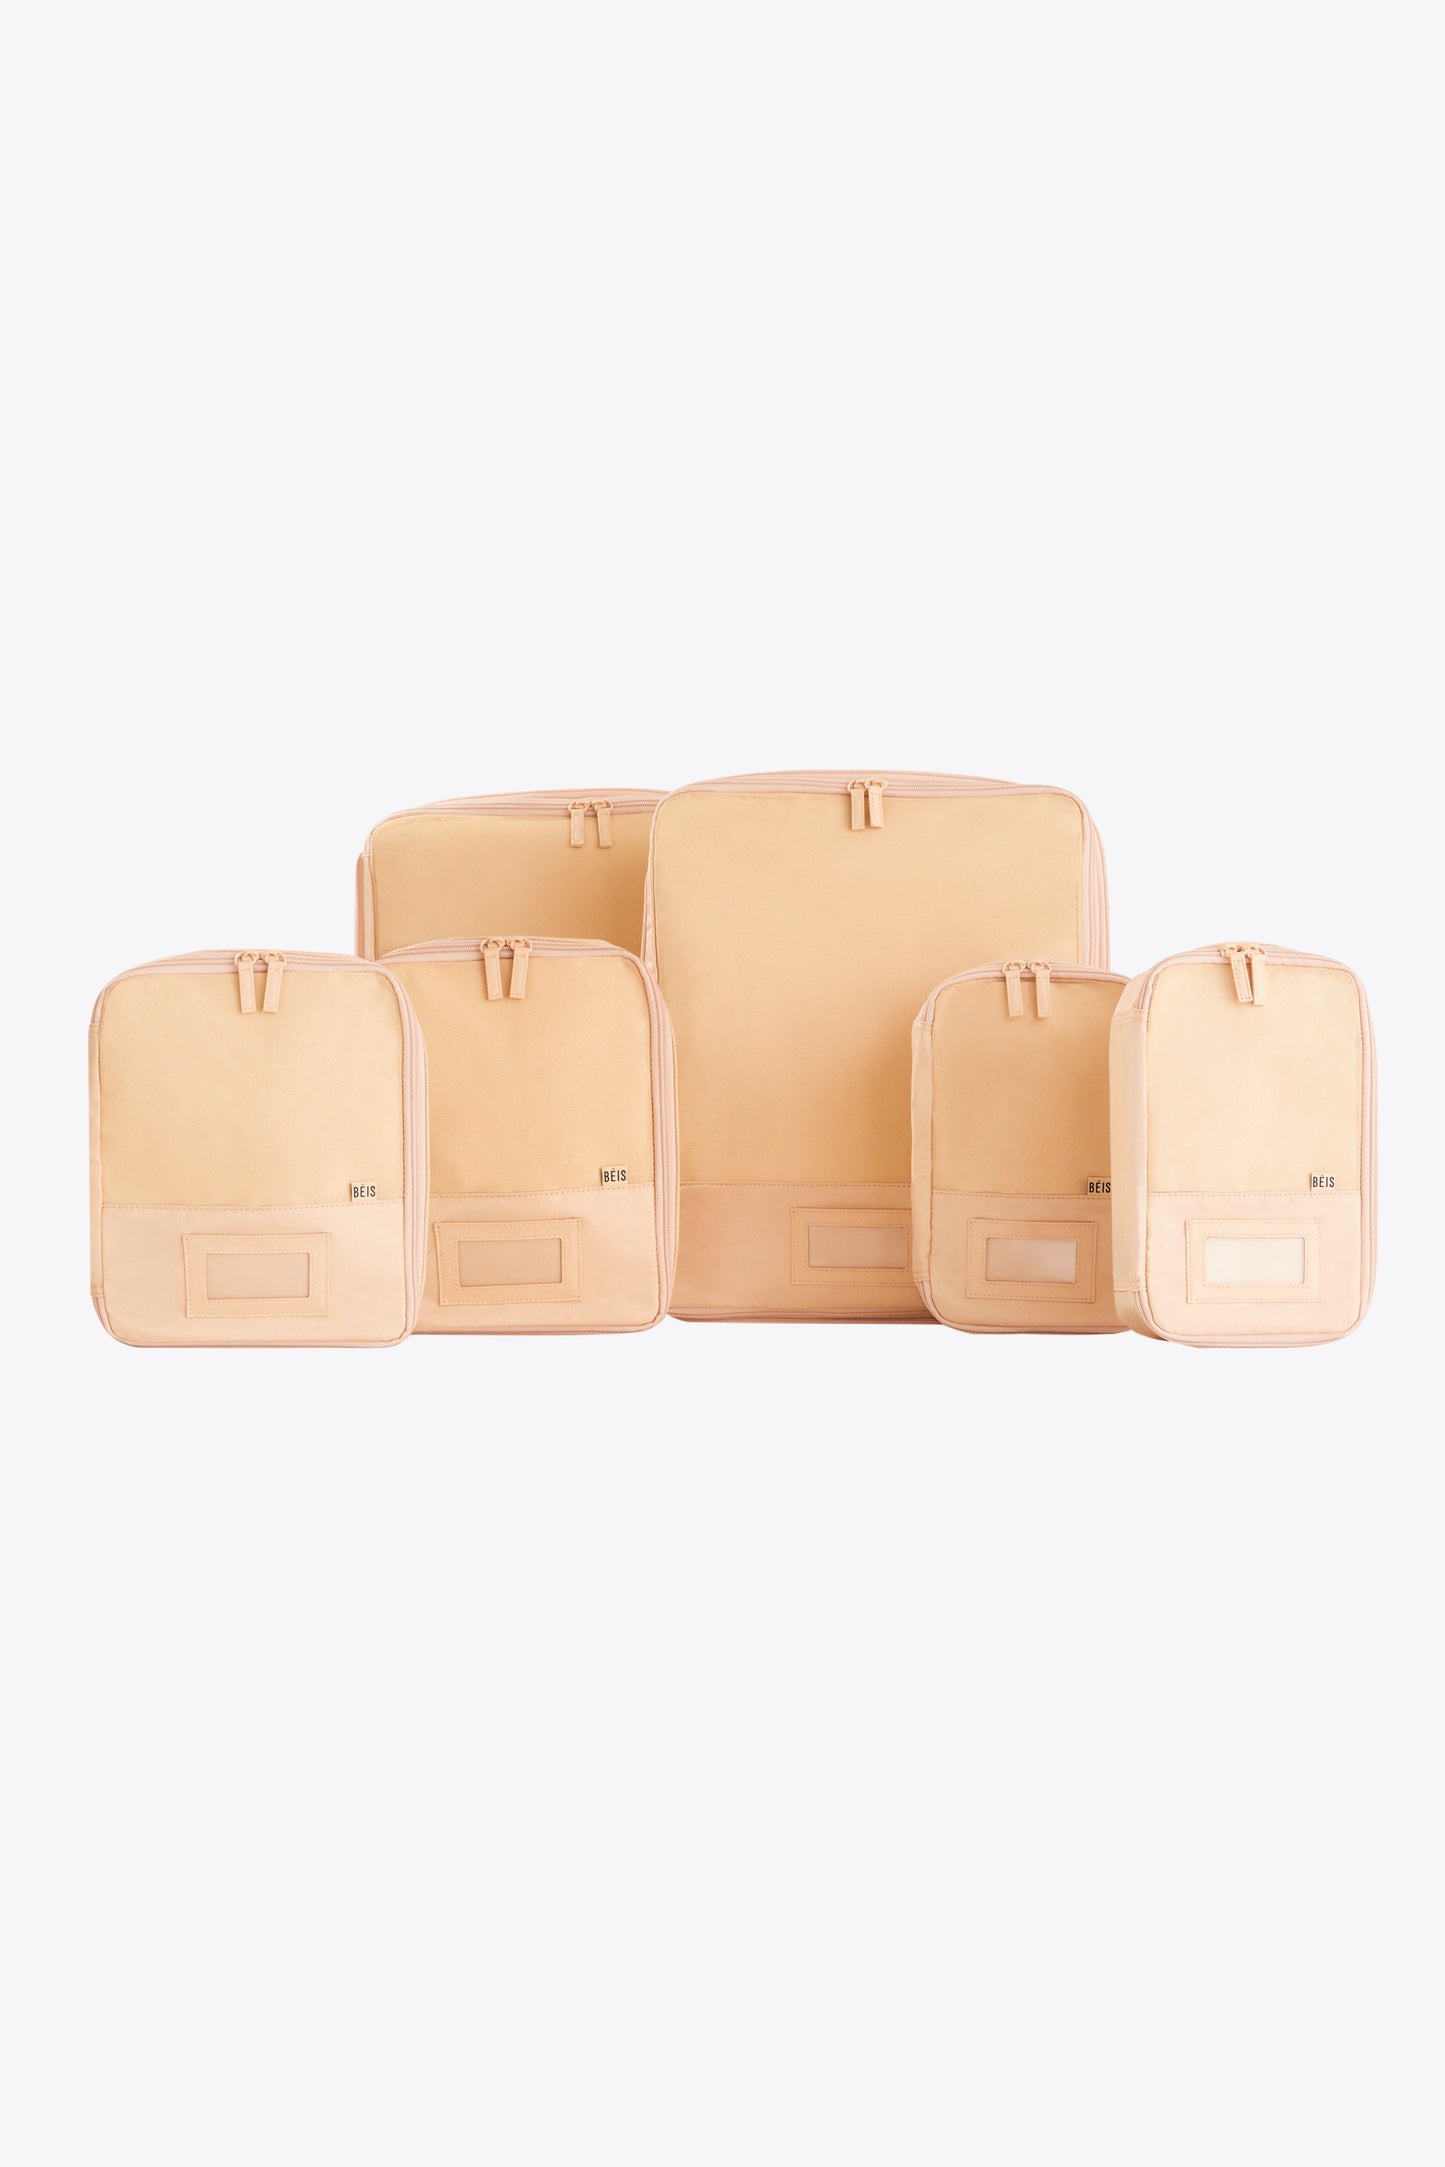 The Compression Packing Cubes 6 pc in Beige